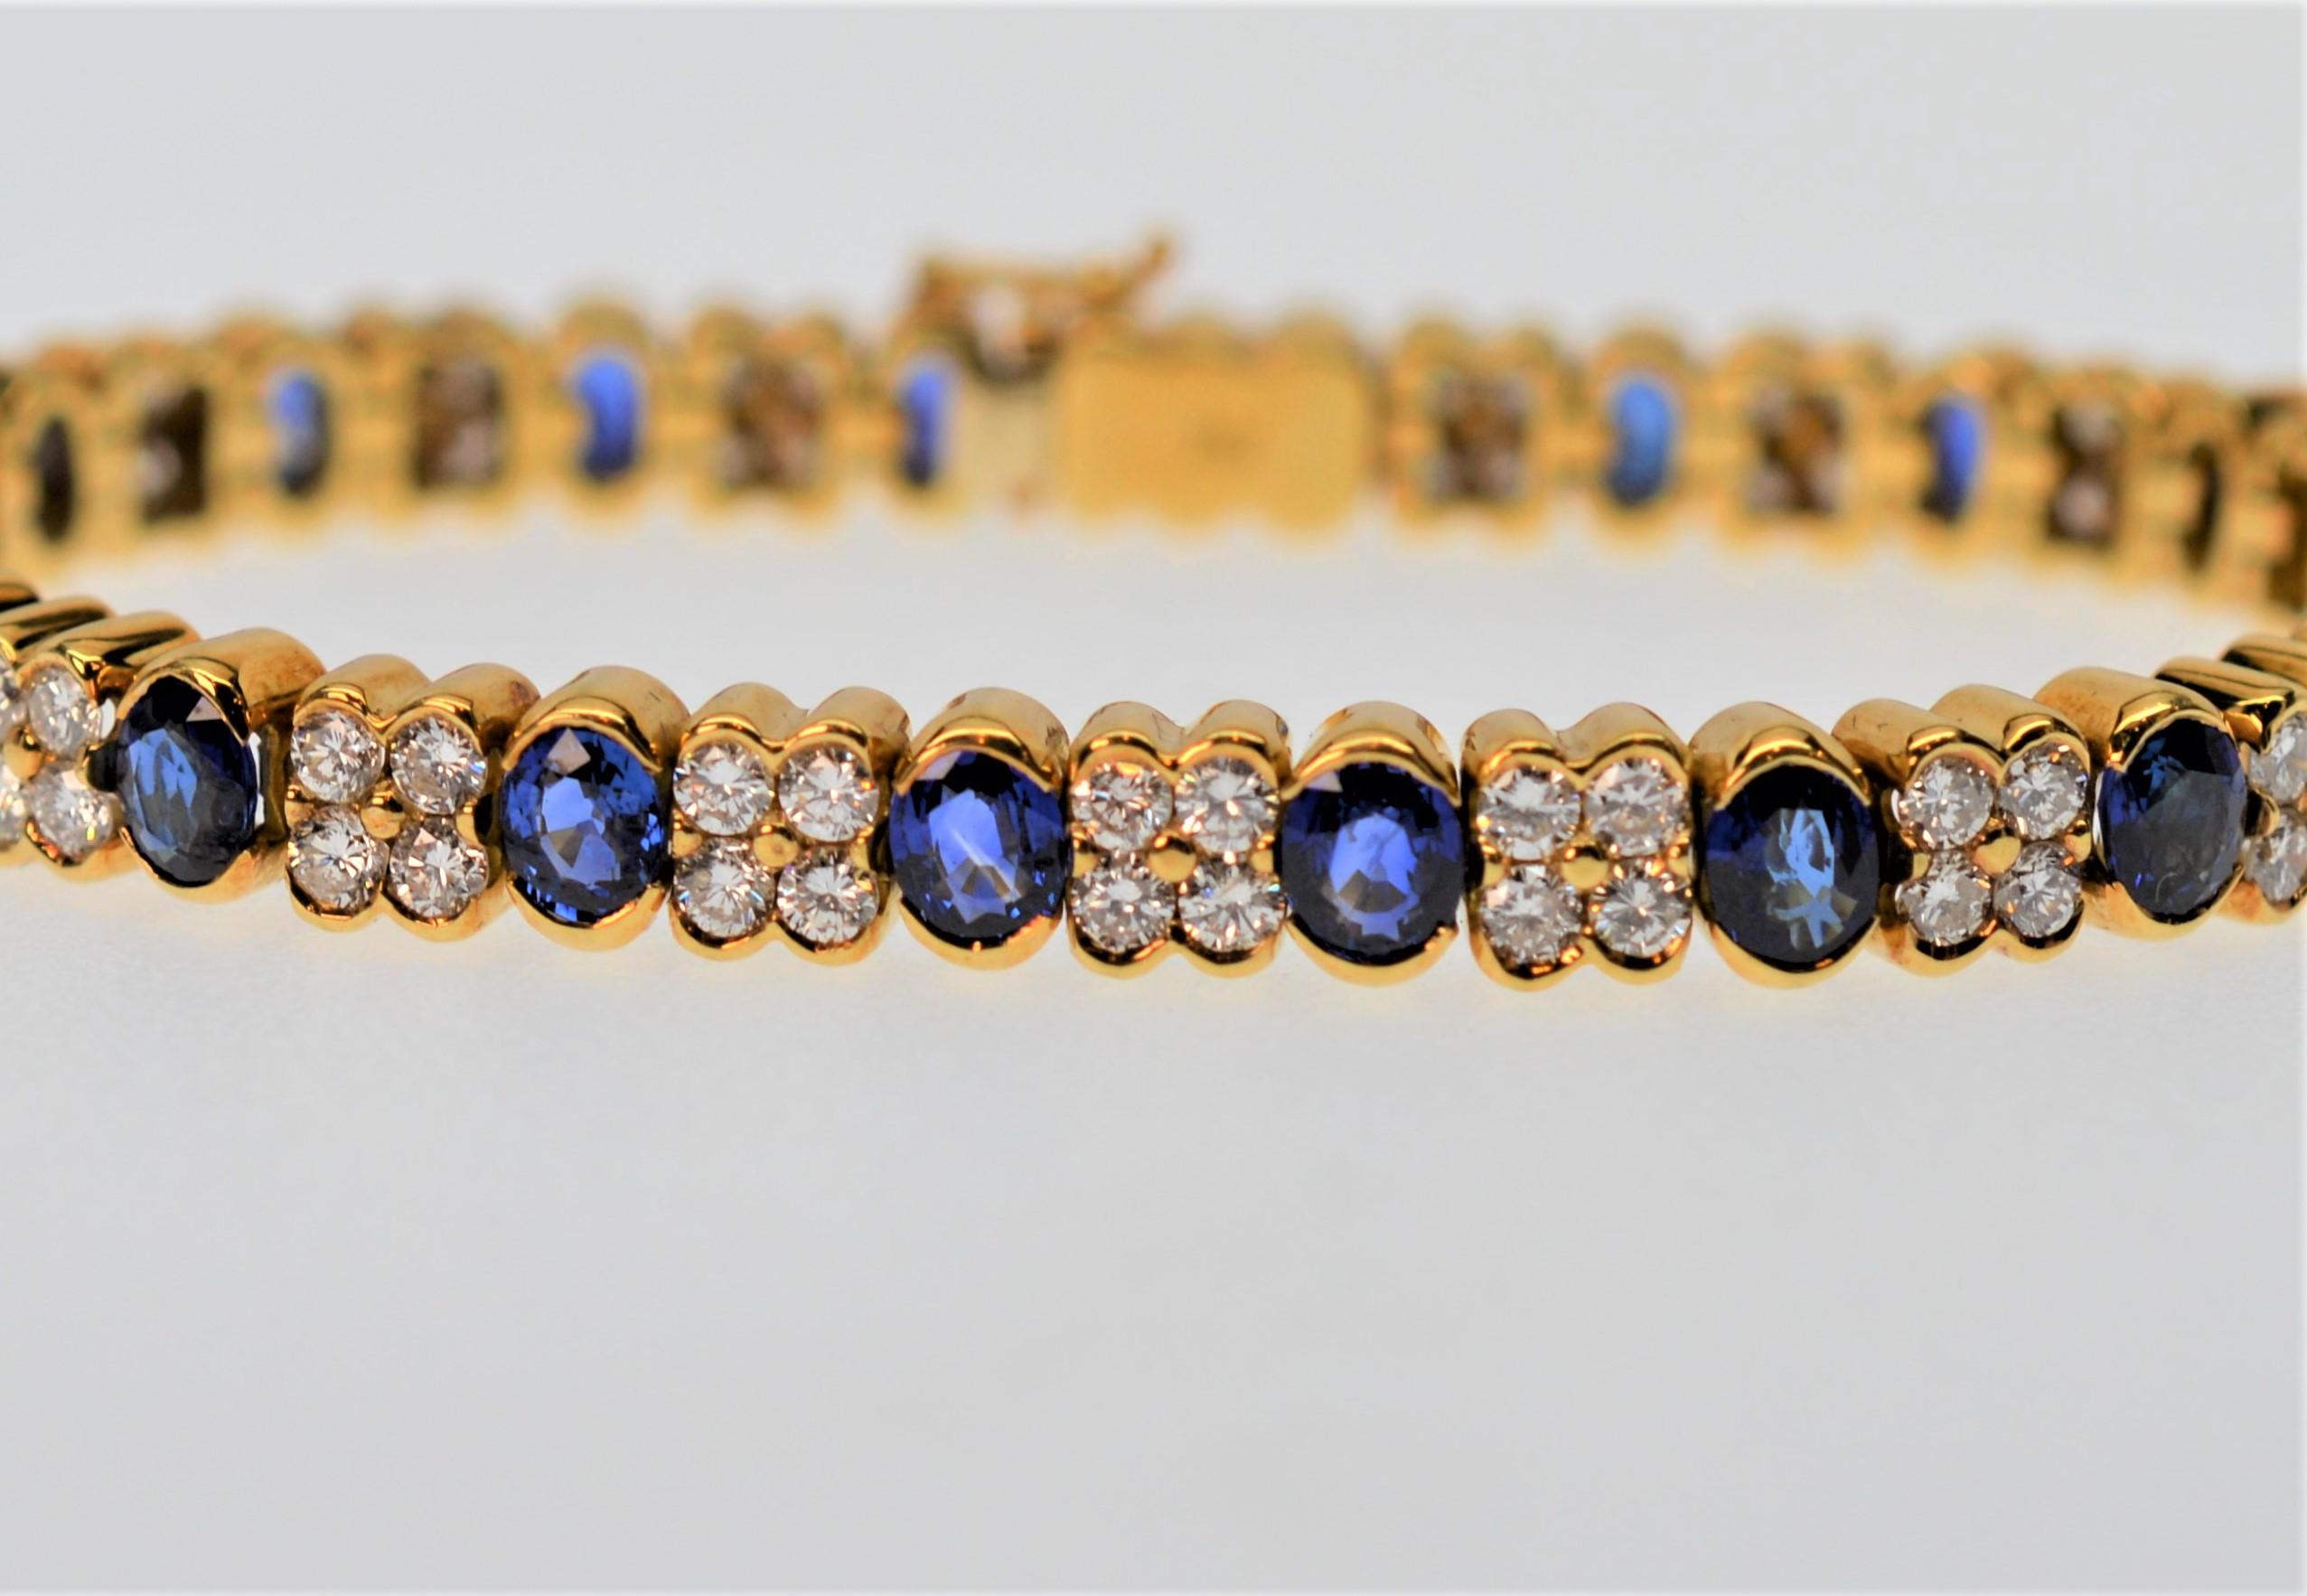 Sensational Blue Sapphire & Bright White Diamond 18K Yellow Gold Bracelet.
An finely constructed estate piece, but essentially new, this glamorous seven inch bracelet is crafted with twenty intense Blue Sapphires, 6.0 cts. total weight and eighty